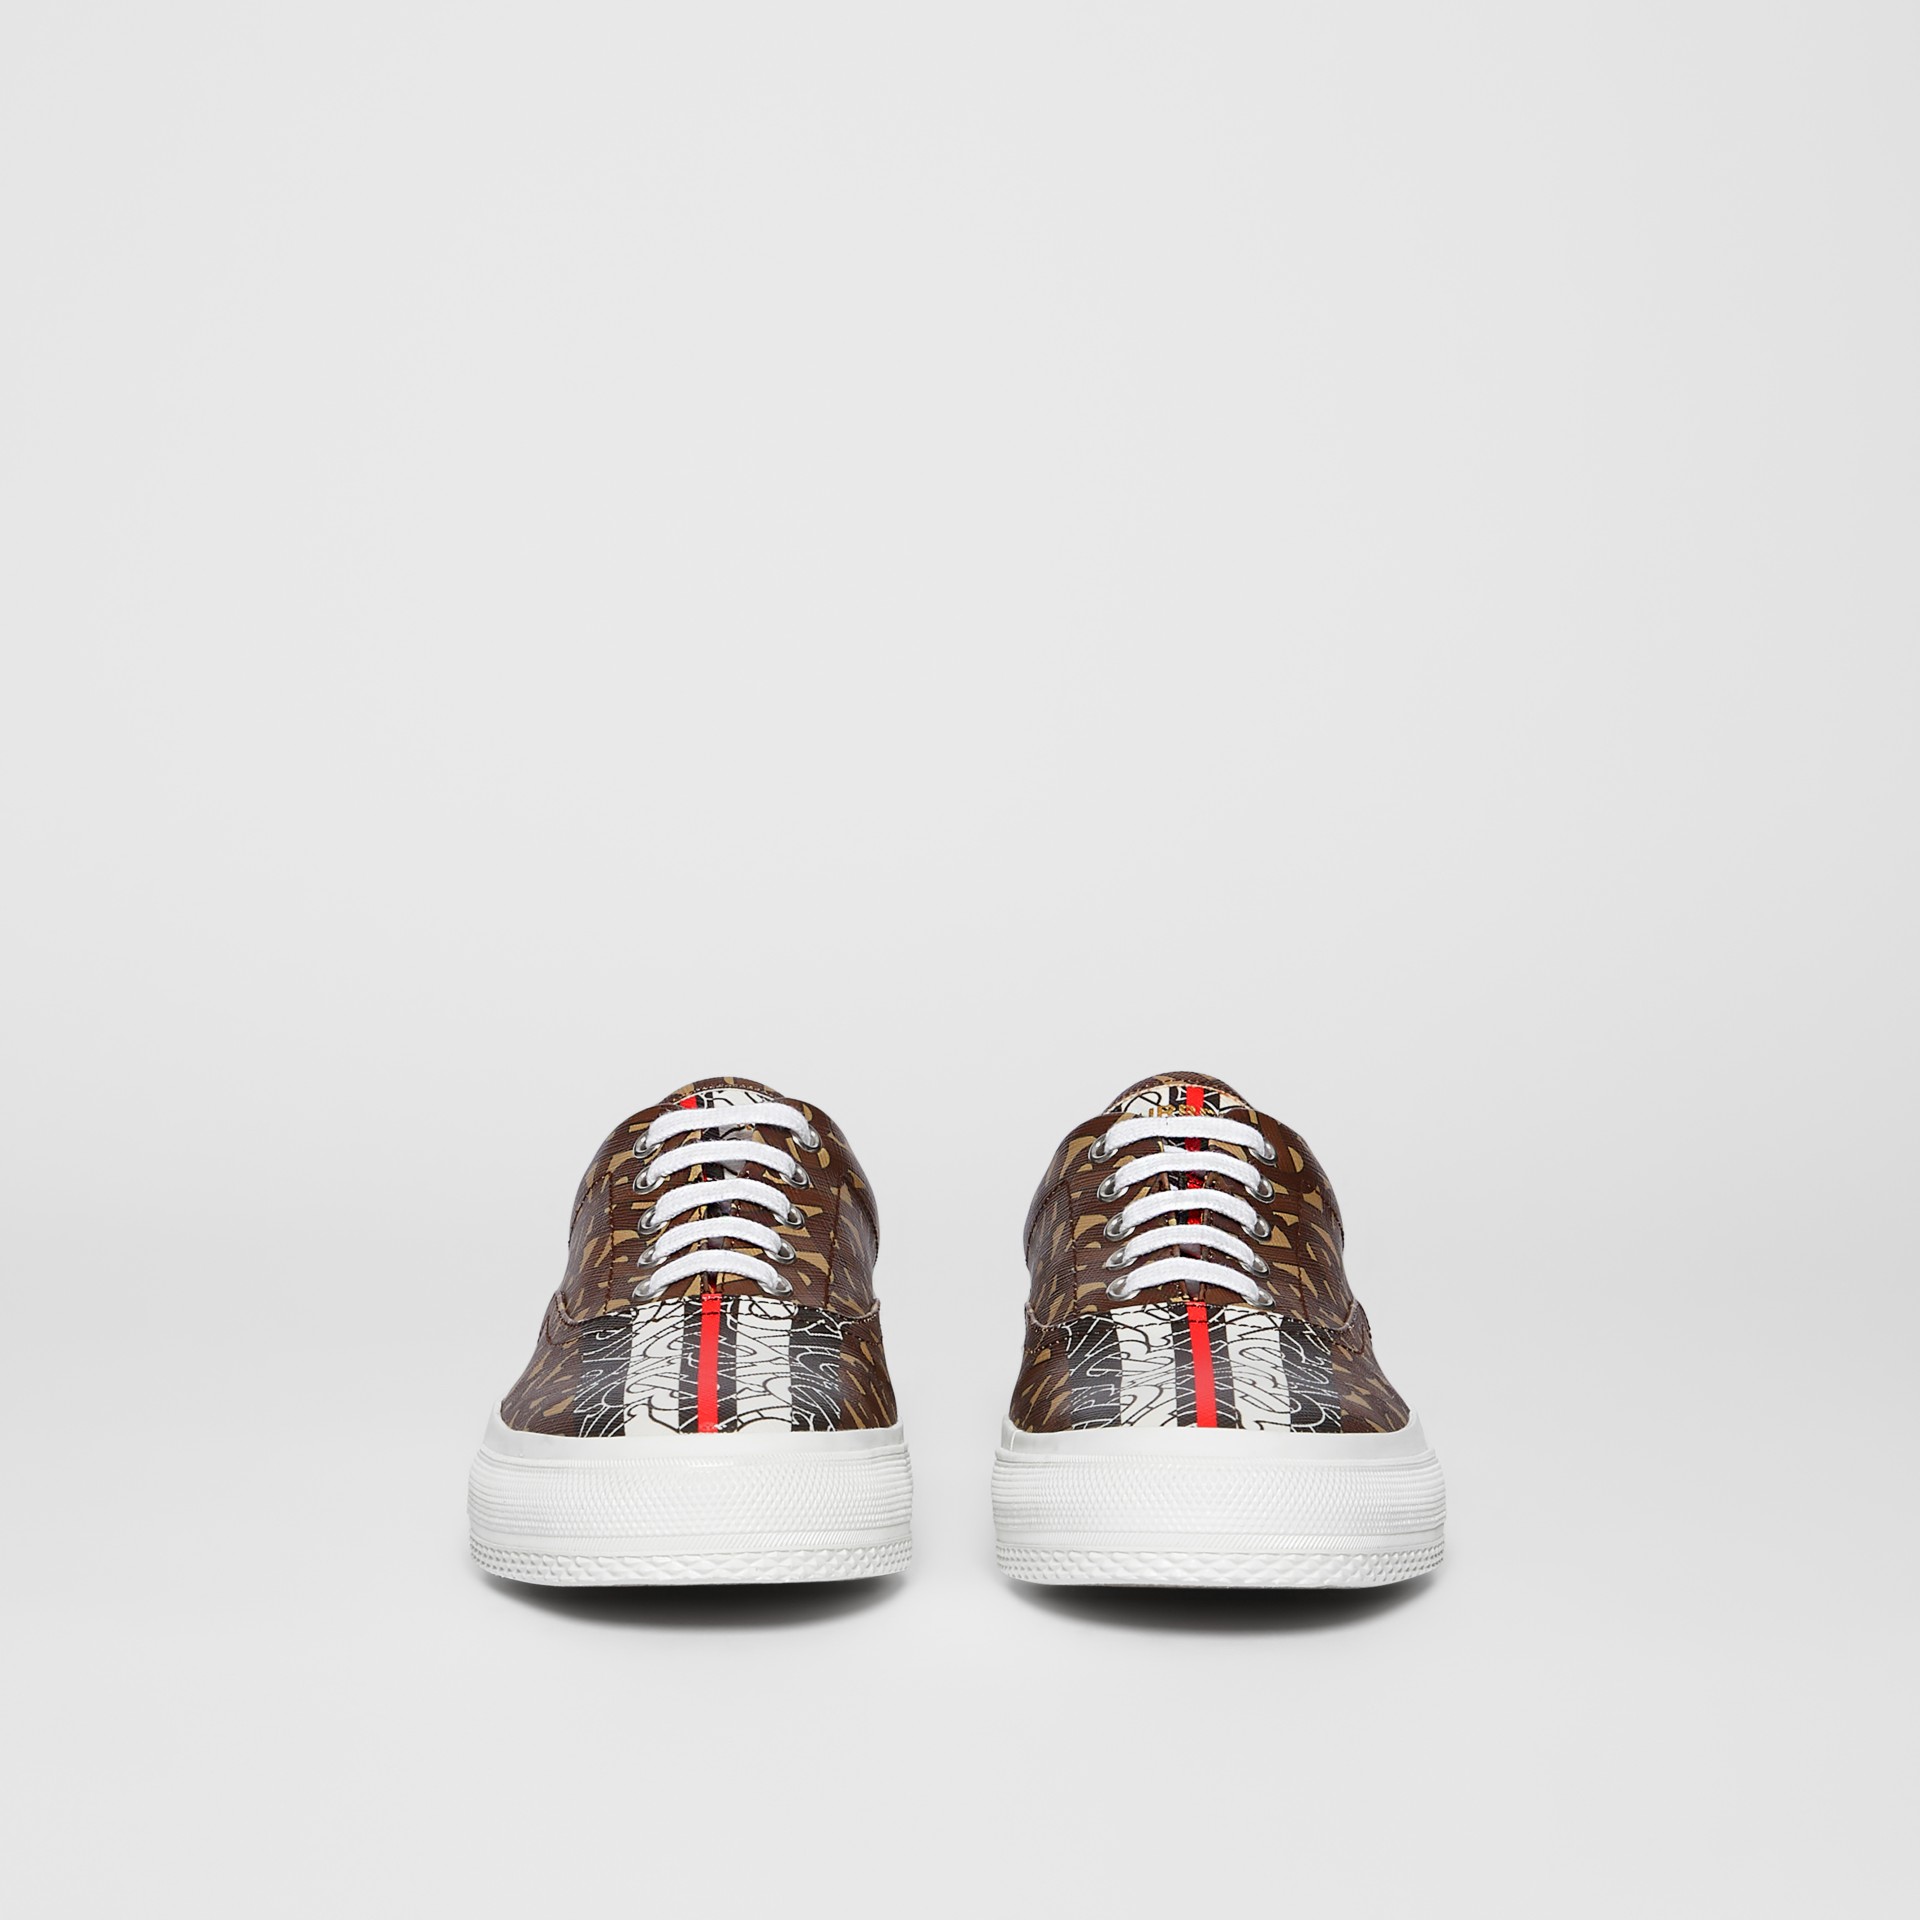 Monogram Stripe E-canvas Sneakers in Bridle Brown - Women | Burberry United States